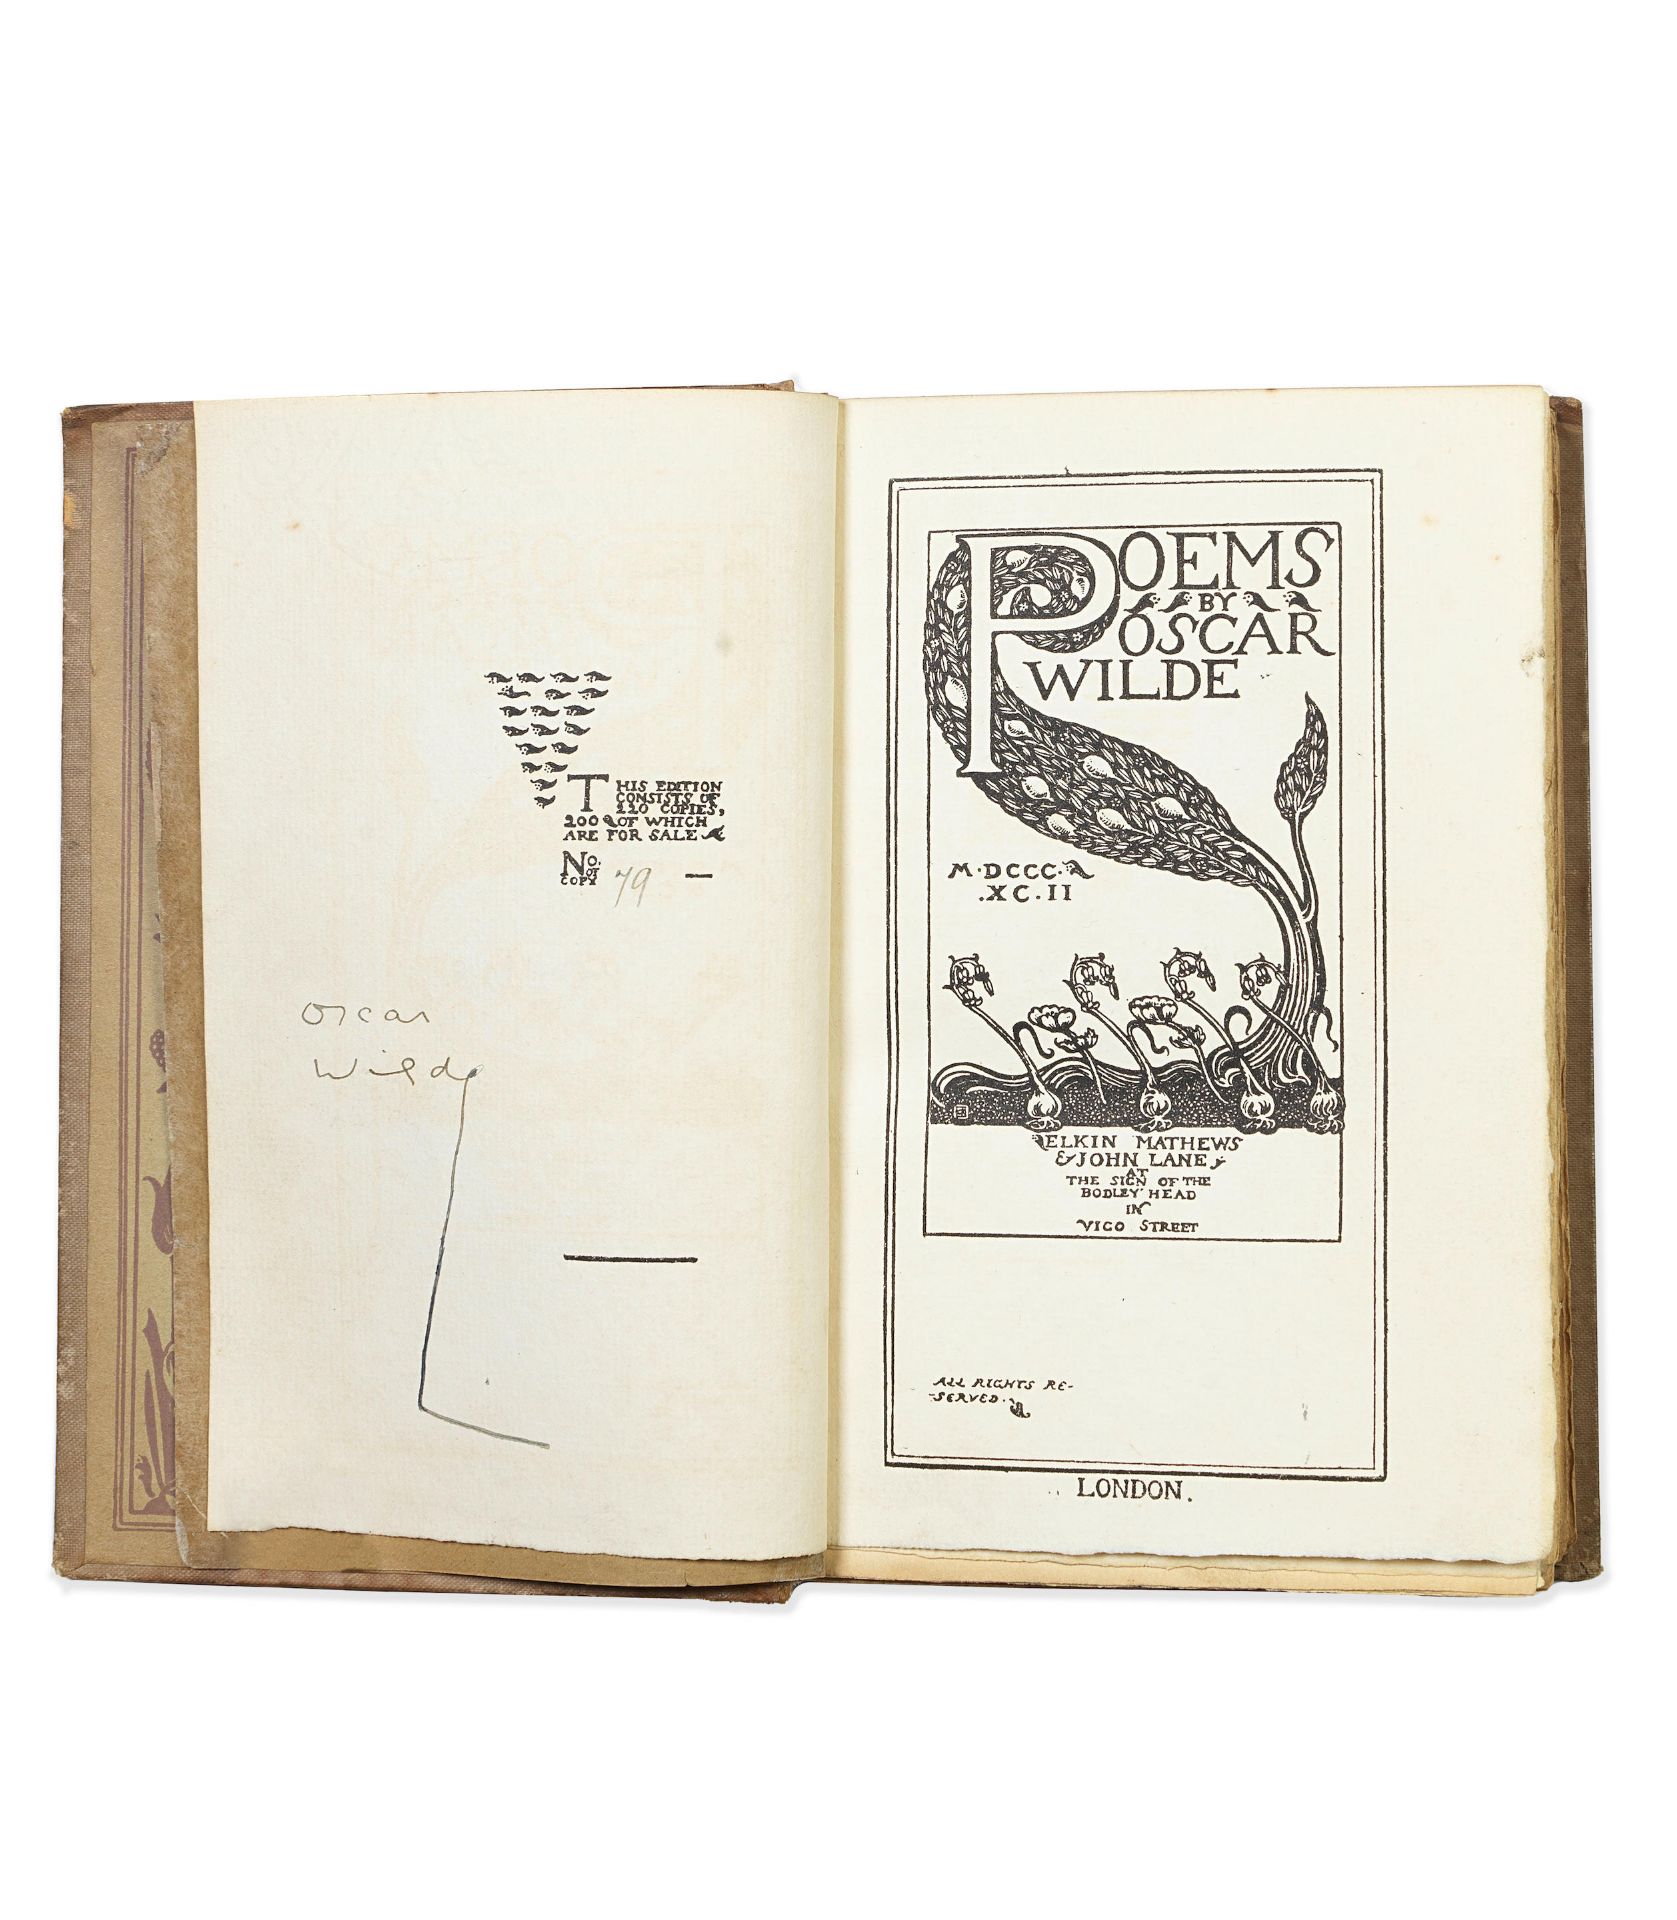 WILDE (OSCAR) Poems, ONE OF 220 COPIES SIGNED BY THE AUTHOR, Elkin Matthews and John Lane, 1892